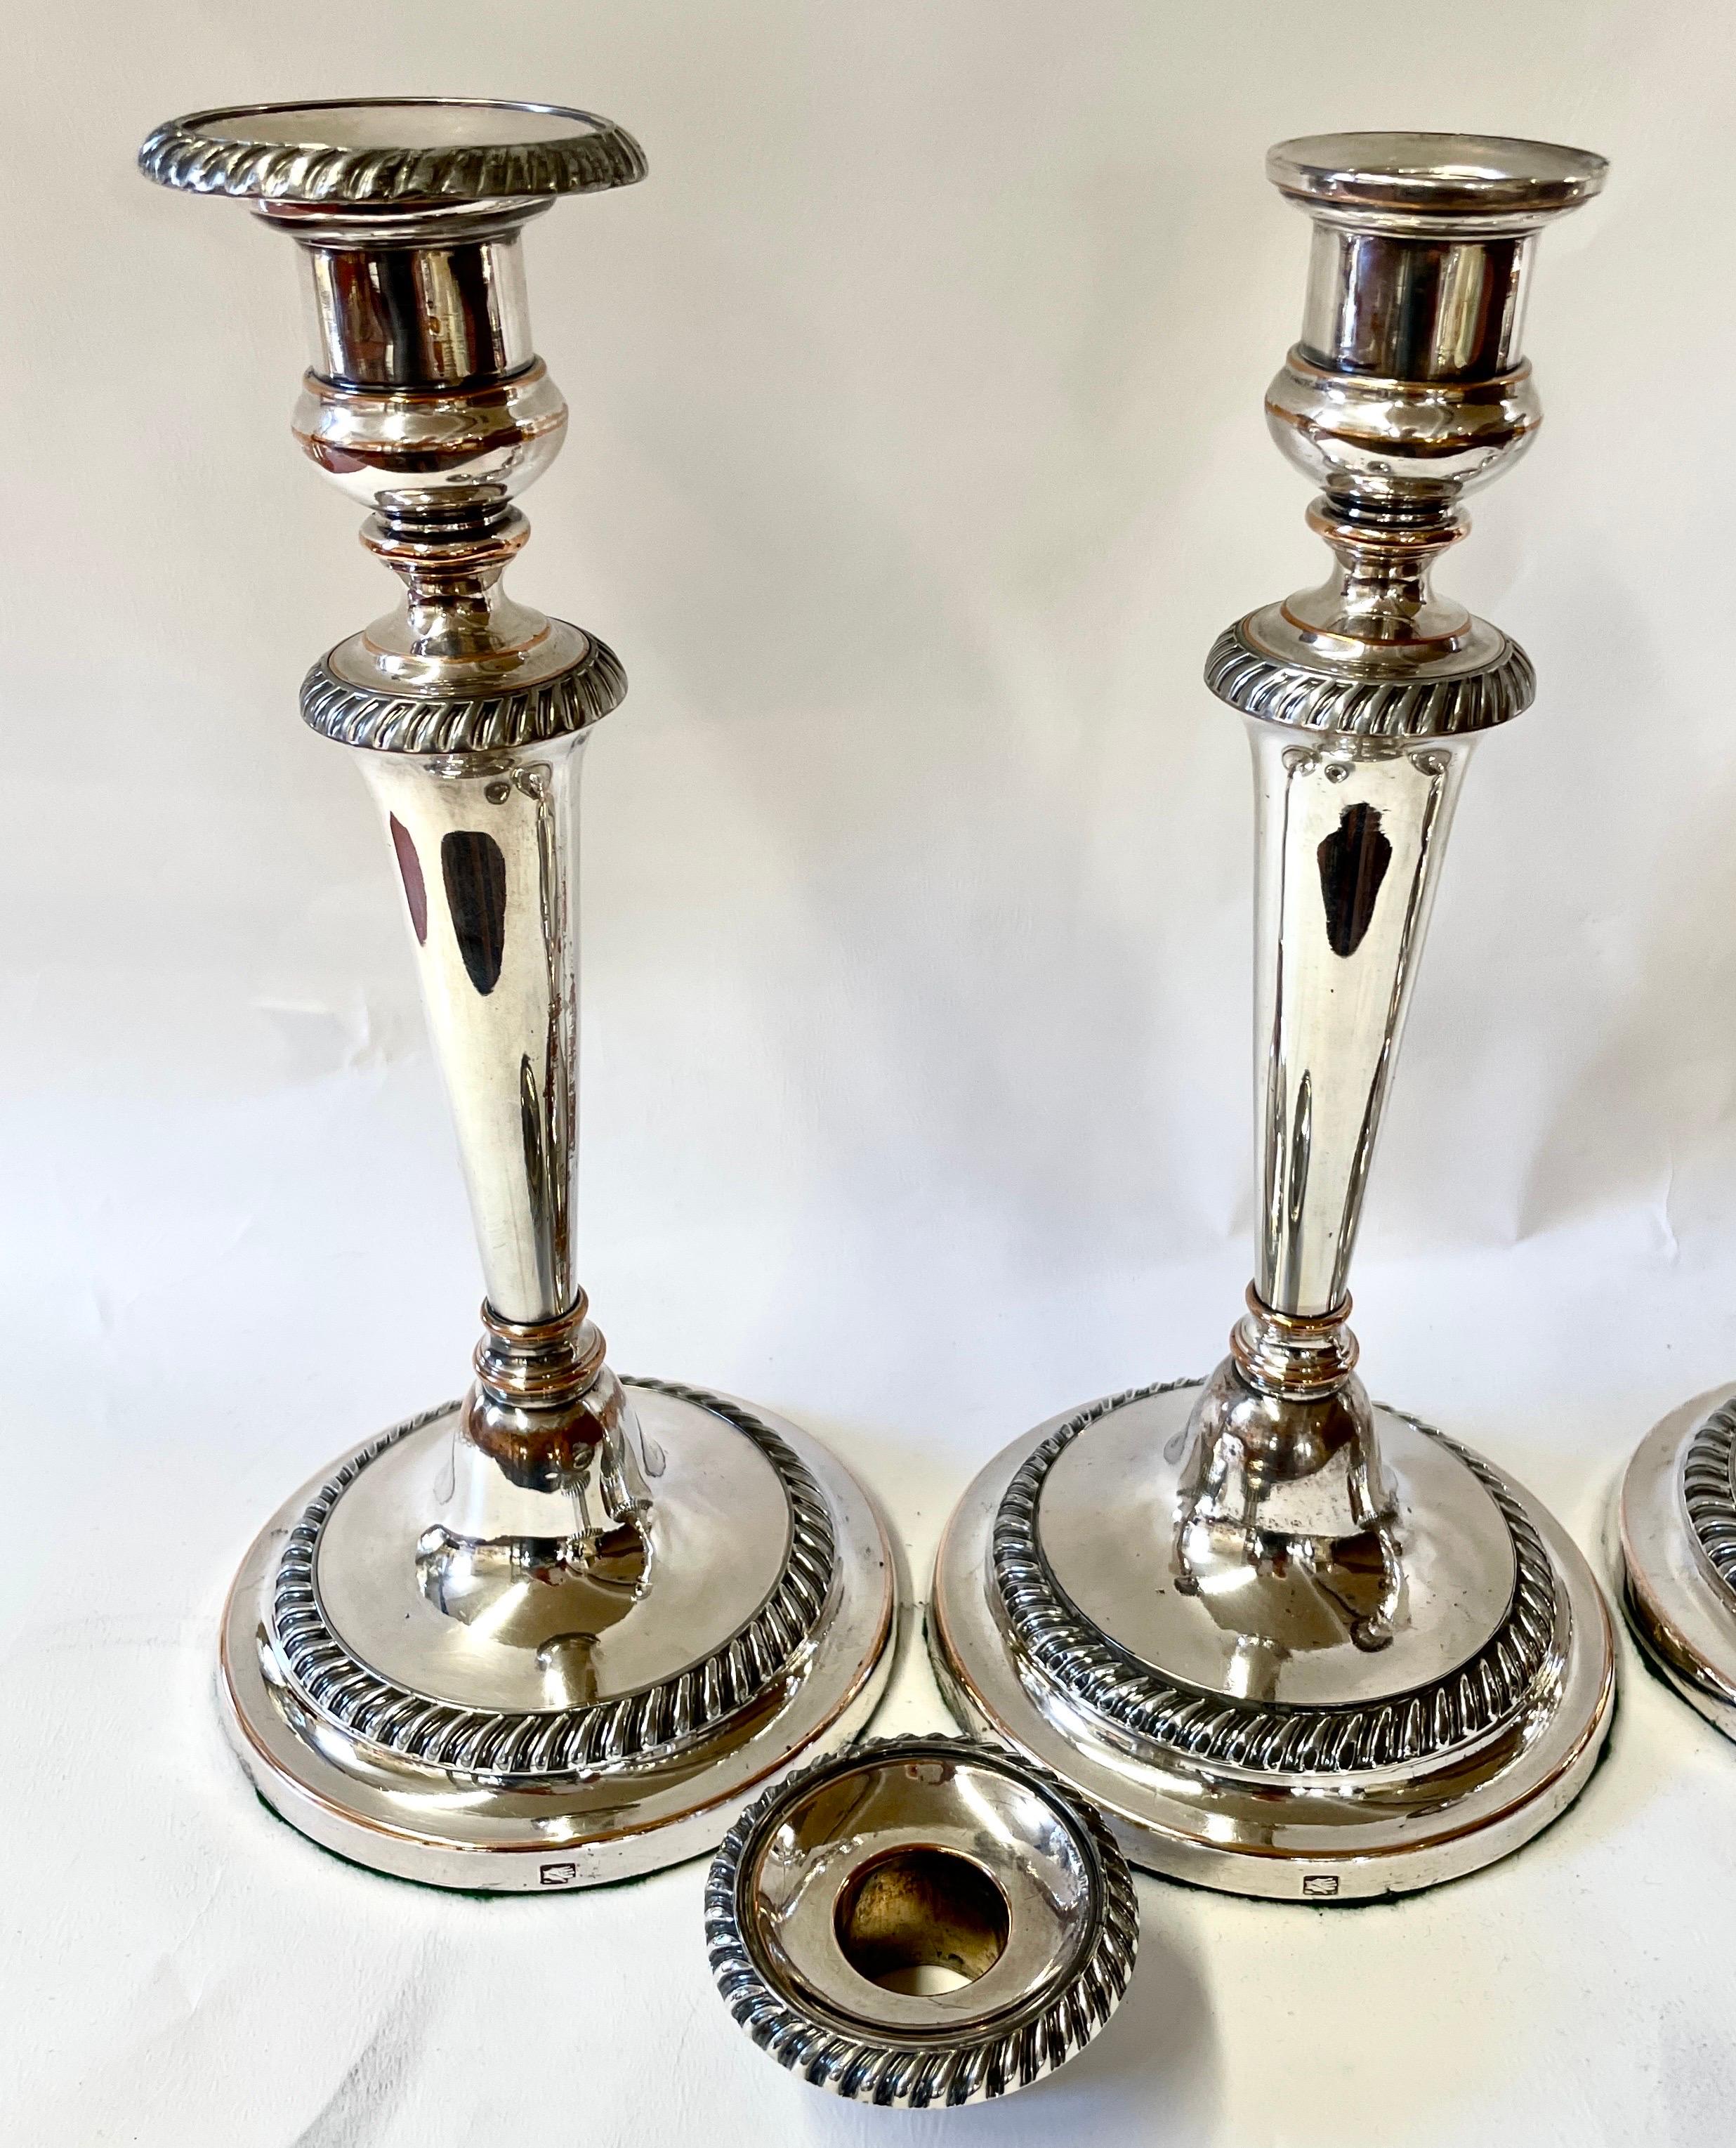 Hand-Crafted Rare Suite of 4 Antique English Geo iii Sheffield Plate Round Base Candlesticks